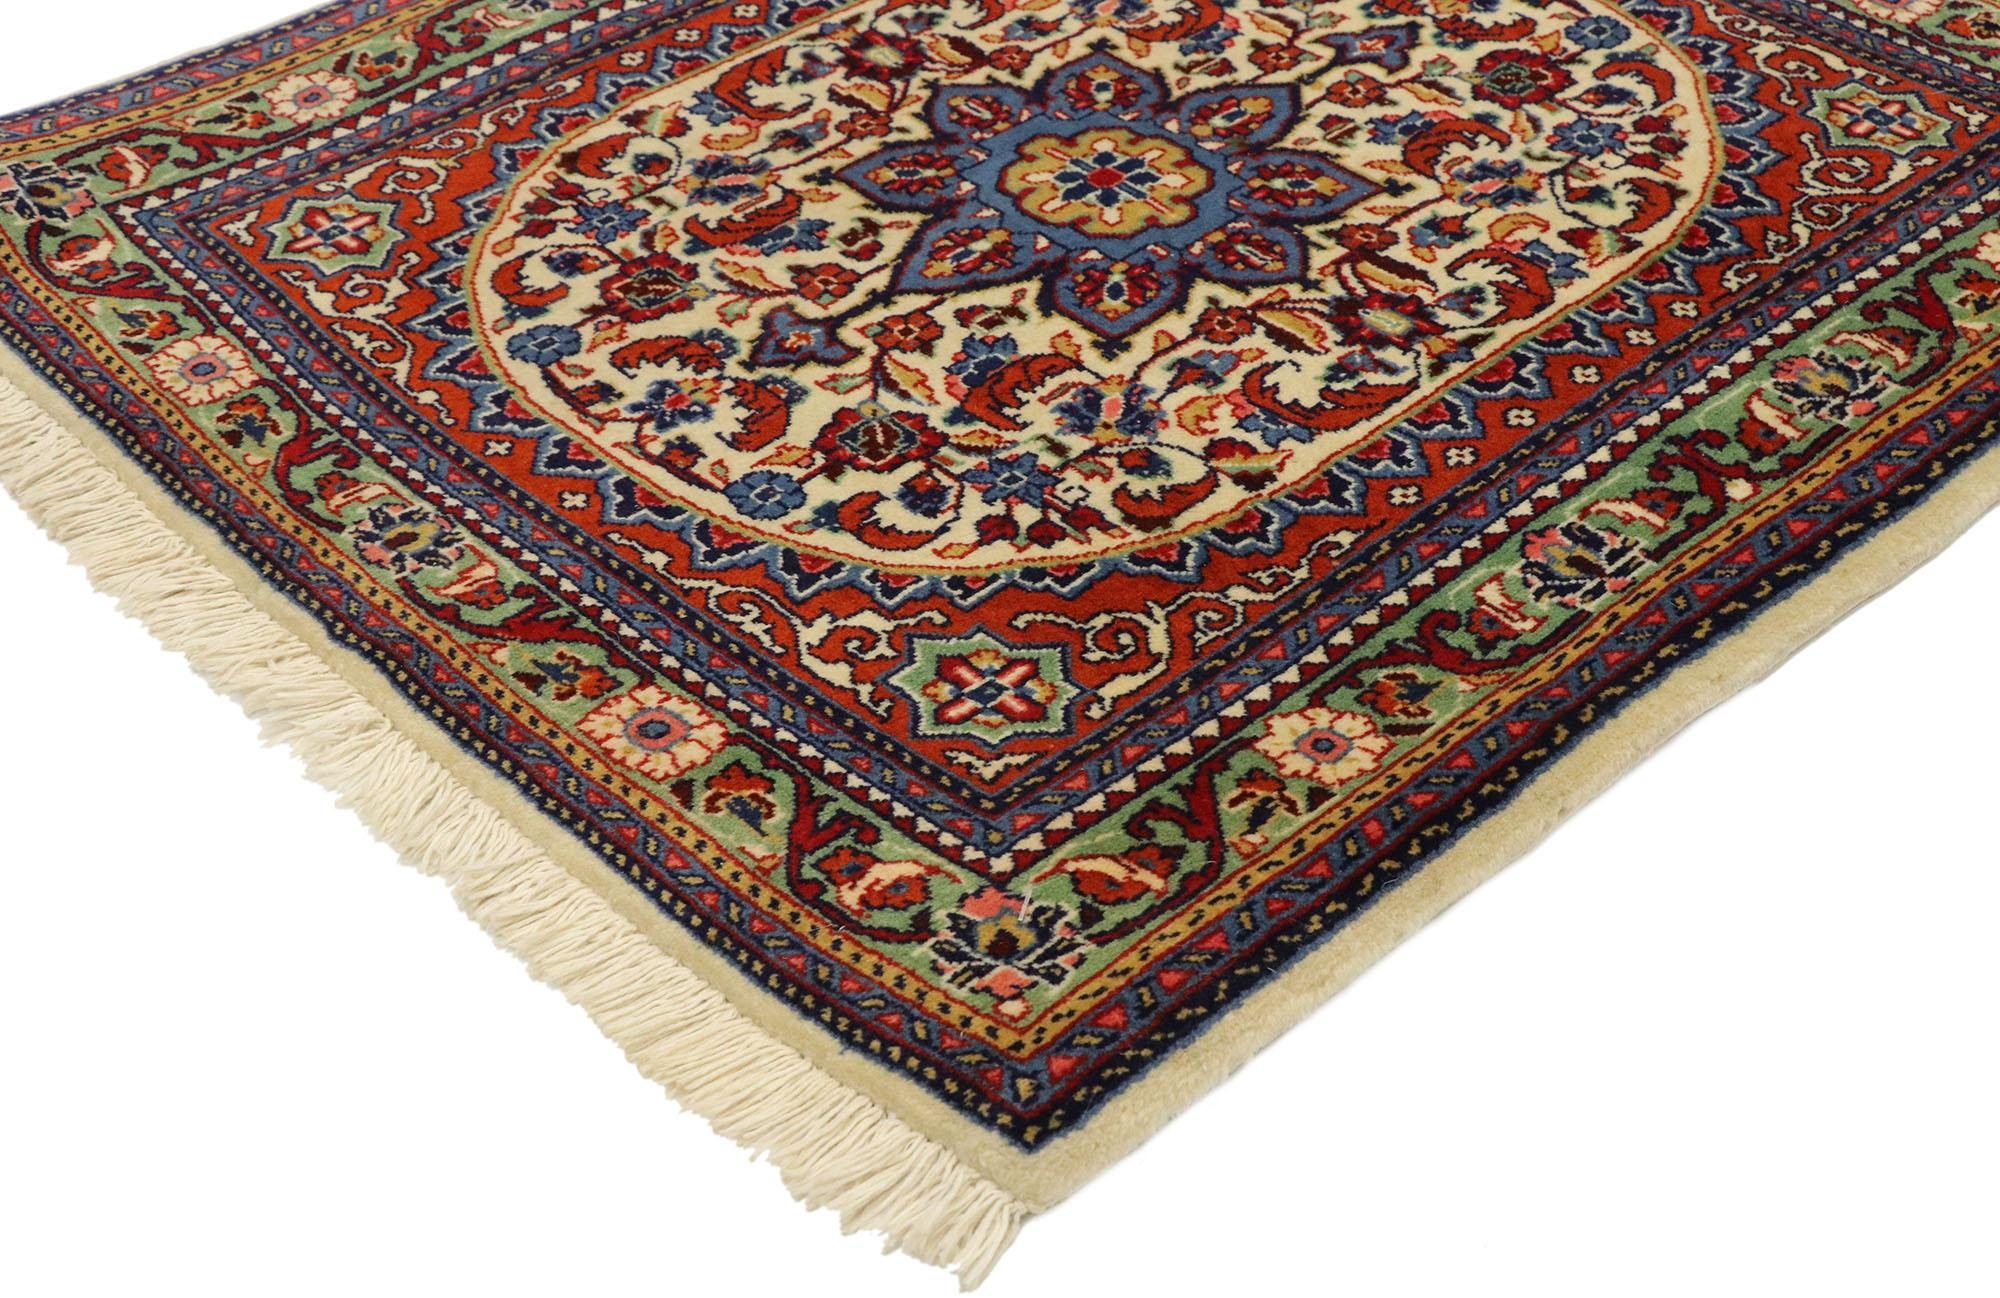 75657 Vintage Persian Sarouk Scatter rug with American Traditional style. Rich in color with beguiling beauty, this hand knotted wool vintage Persian Sarouk scatter rug beautifully embodies American Traditional style. It features a cornflower blue